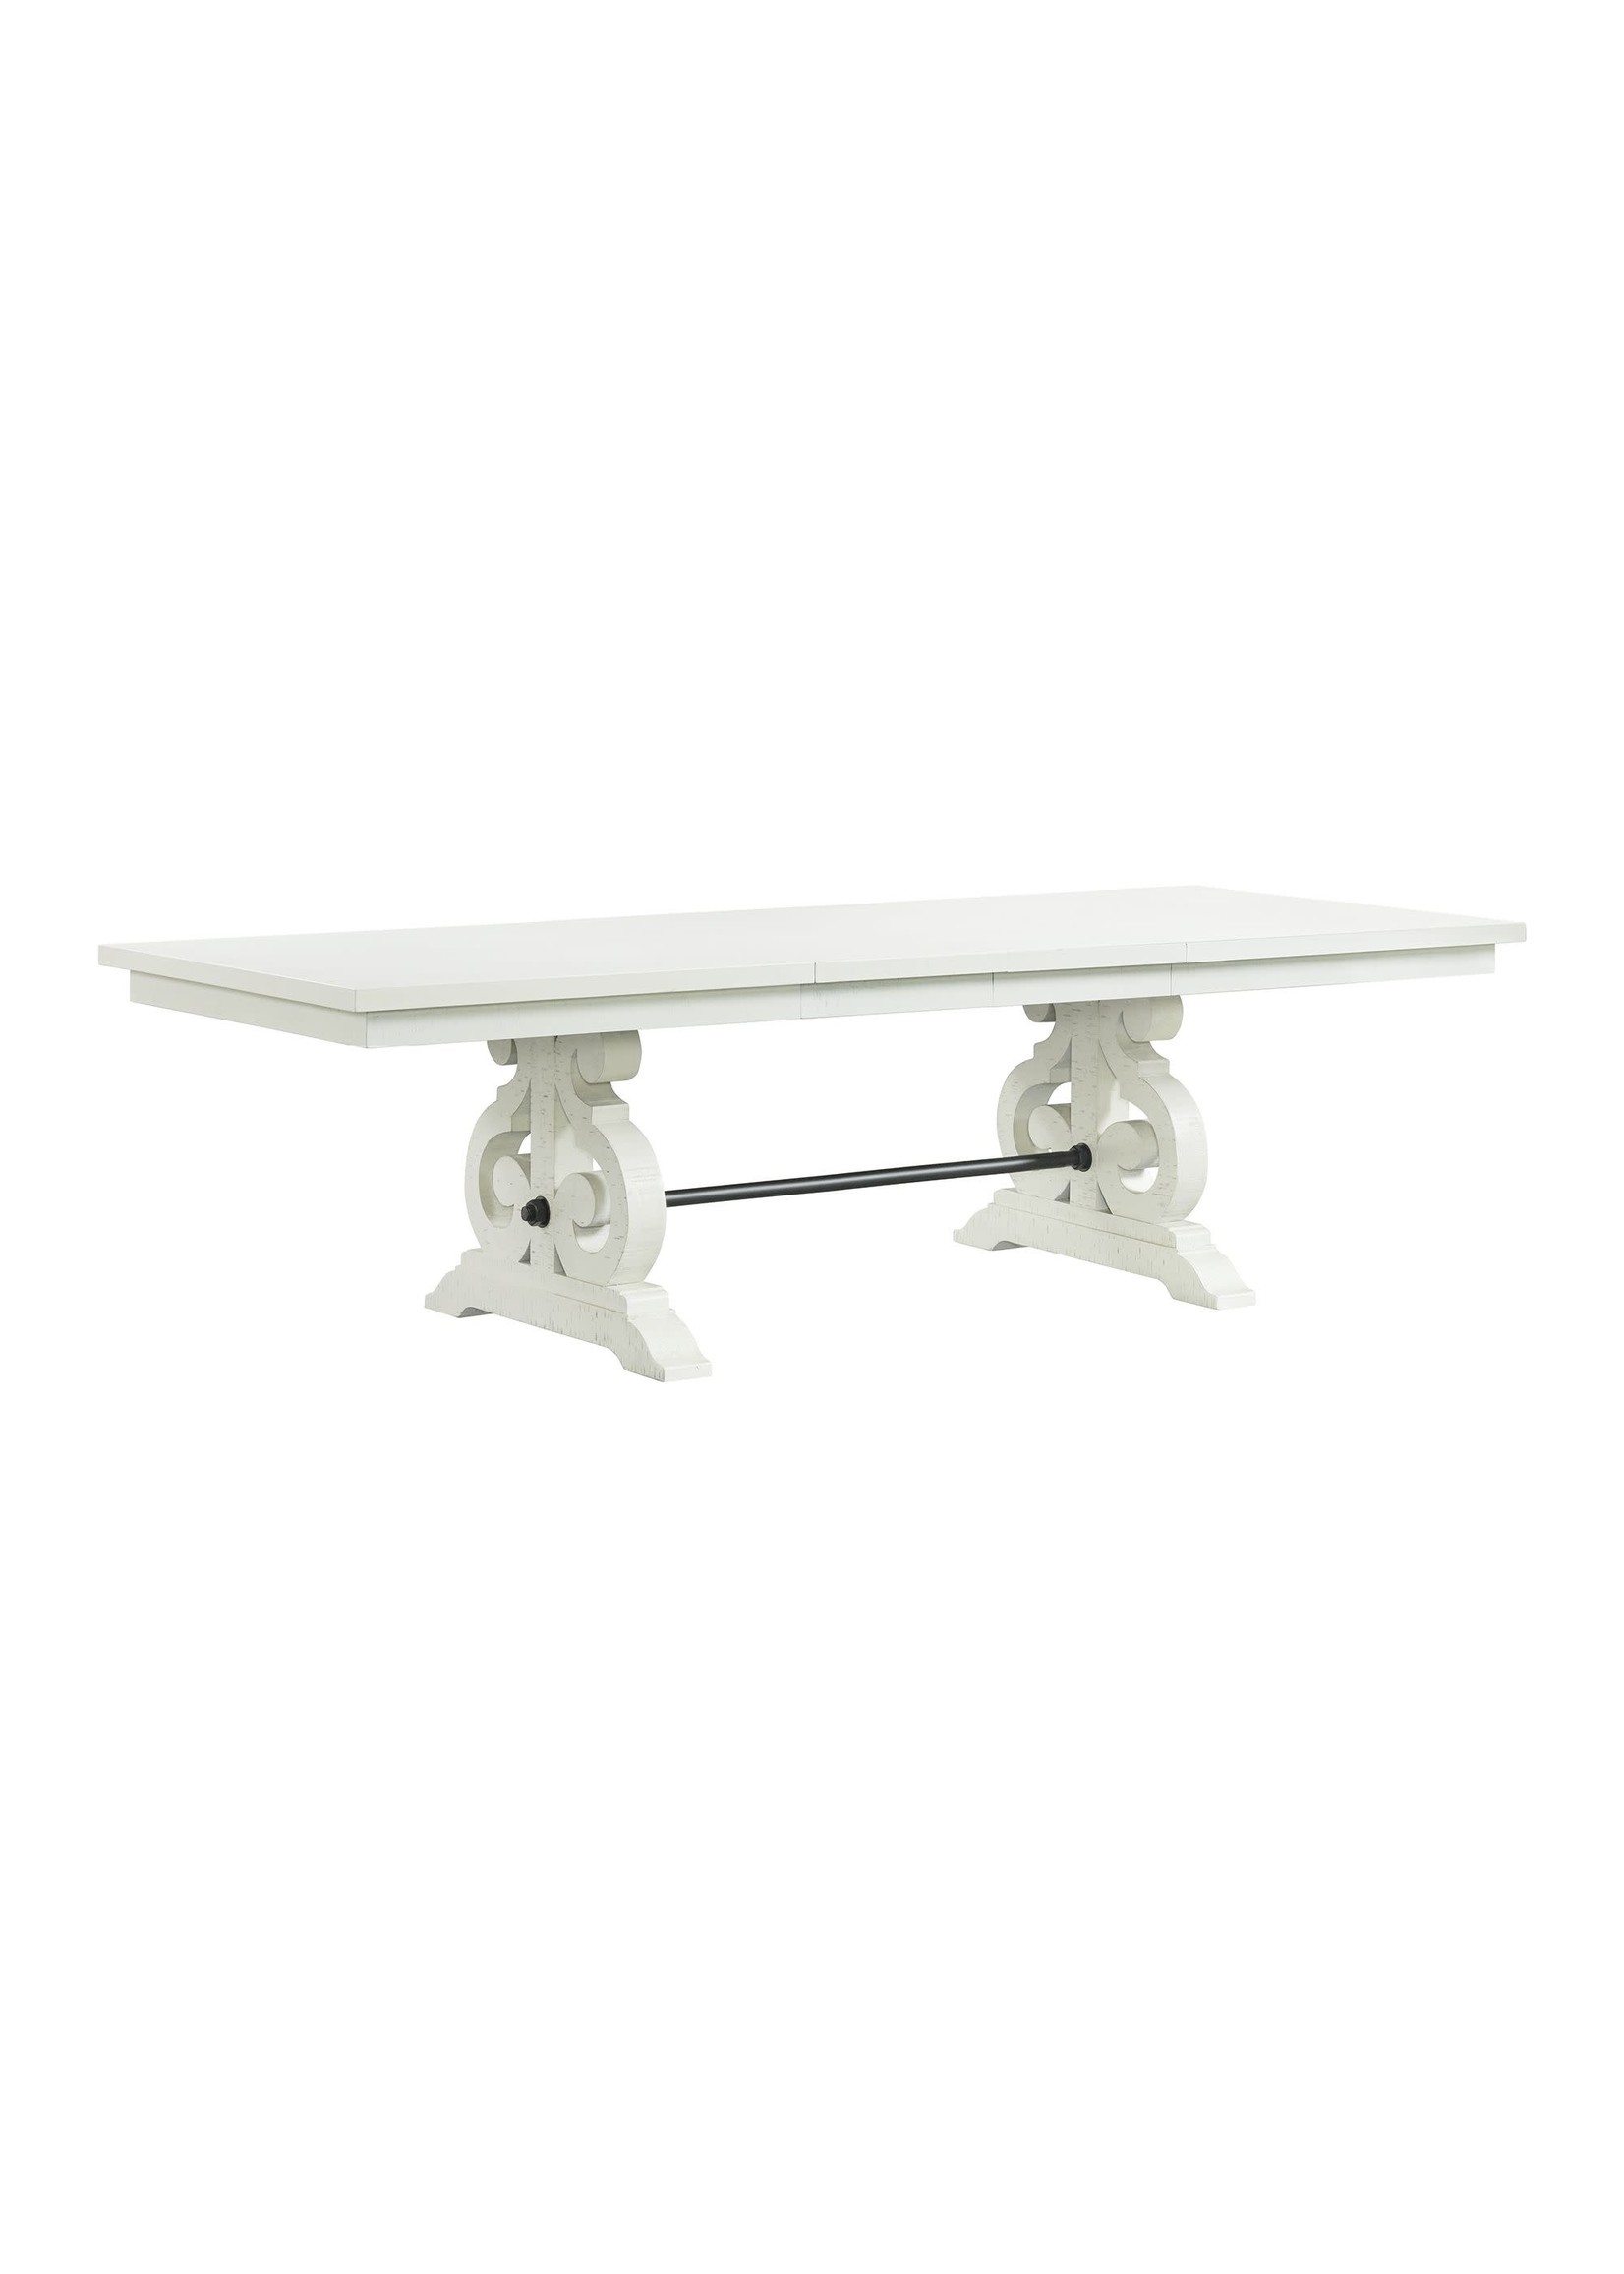 ELEMENTS DST700DTC STONE DINING TABLE IN WHITE